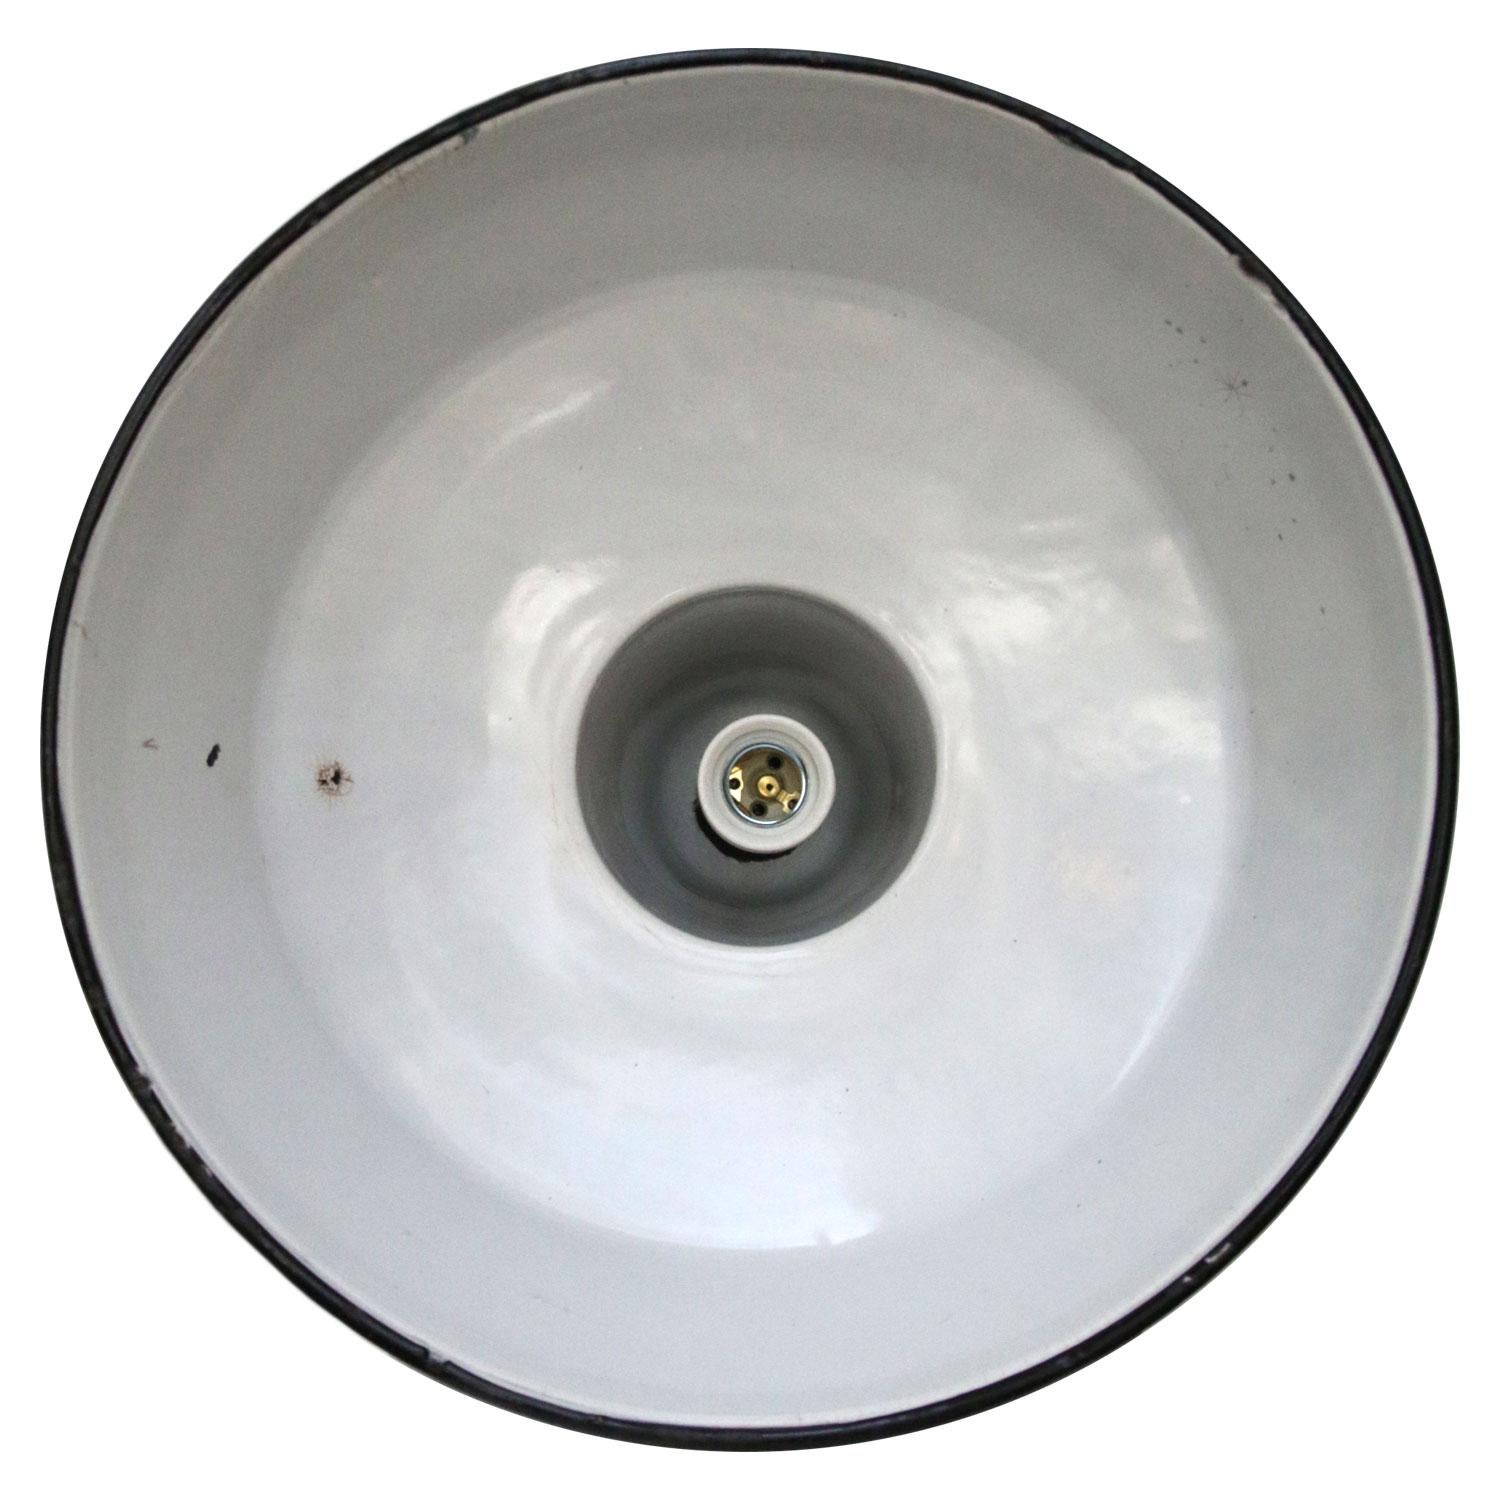 Petrol enamel industrial pendant. White interior.

Weight: 2.0 kg / 4.4 lb

Priced individual item. All lamps have been made suitable by international standards for incandescent light bulbs, energy-efficient and LED bulbs. E26/E27 bulb holders and